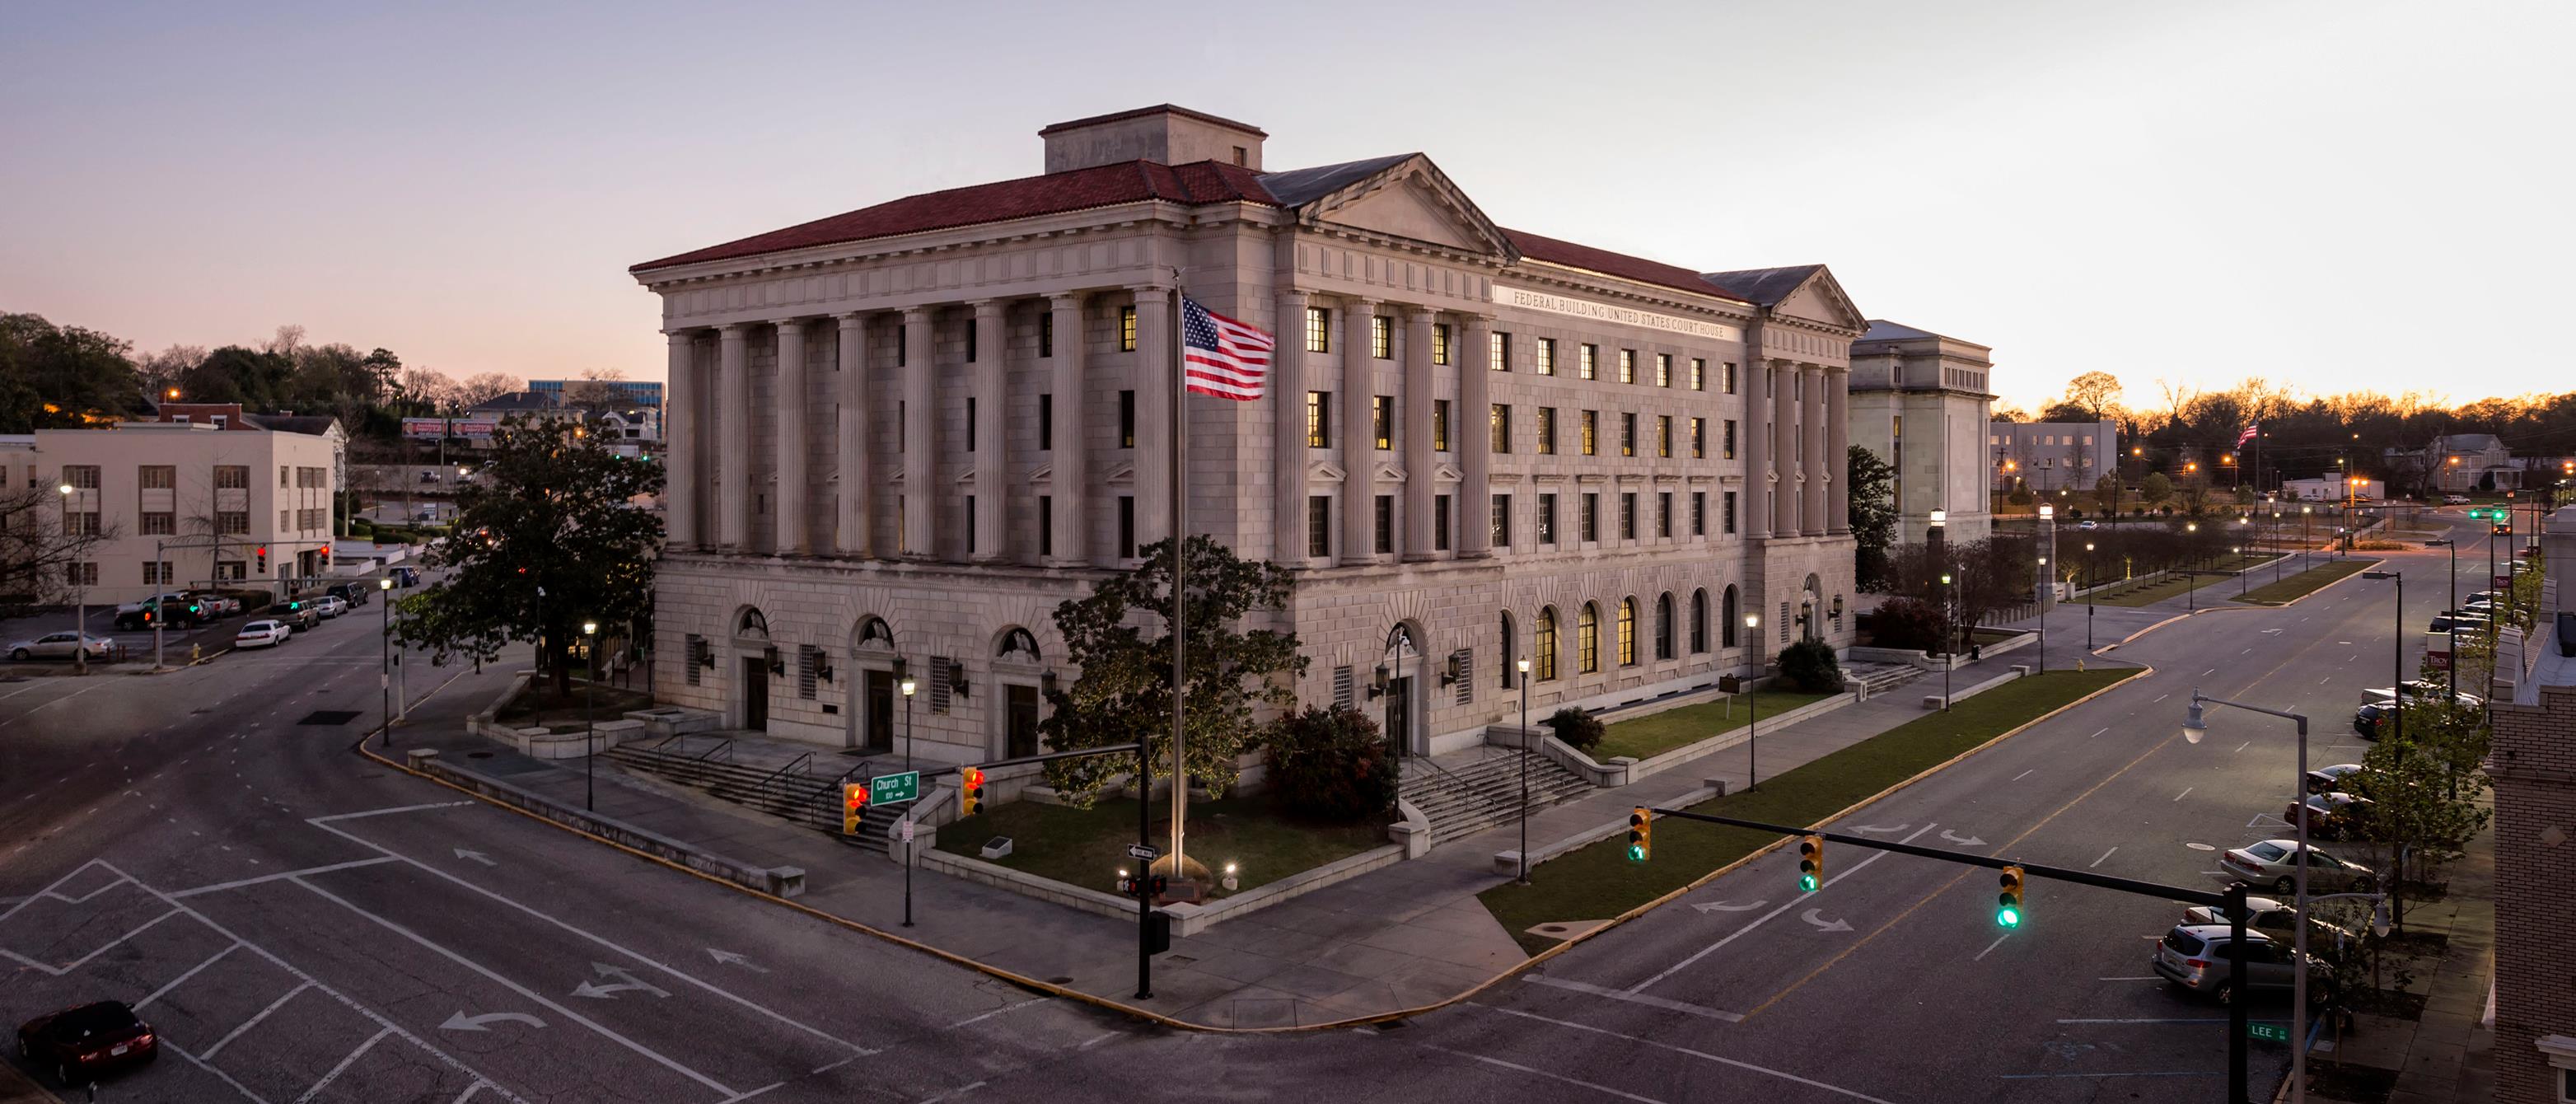 State district. Federal District Courts. United States District Court. Районный суд США. Federal District Court in USA.